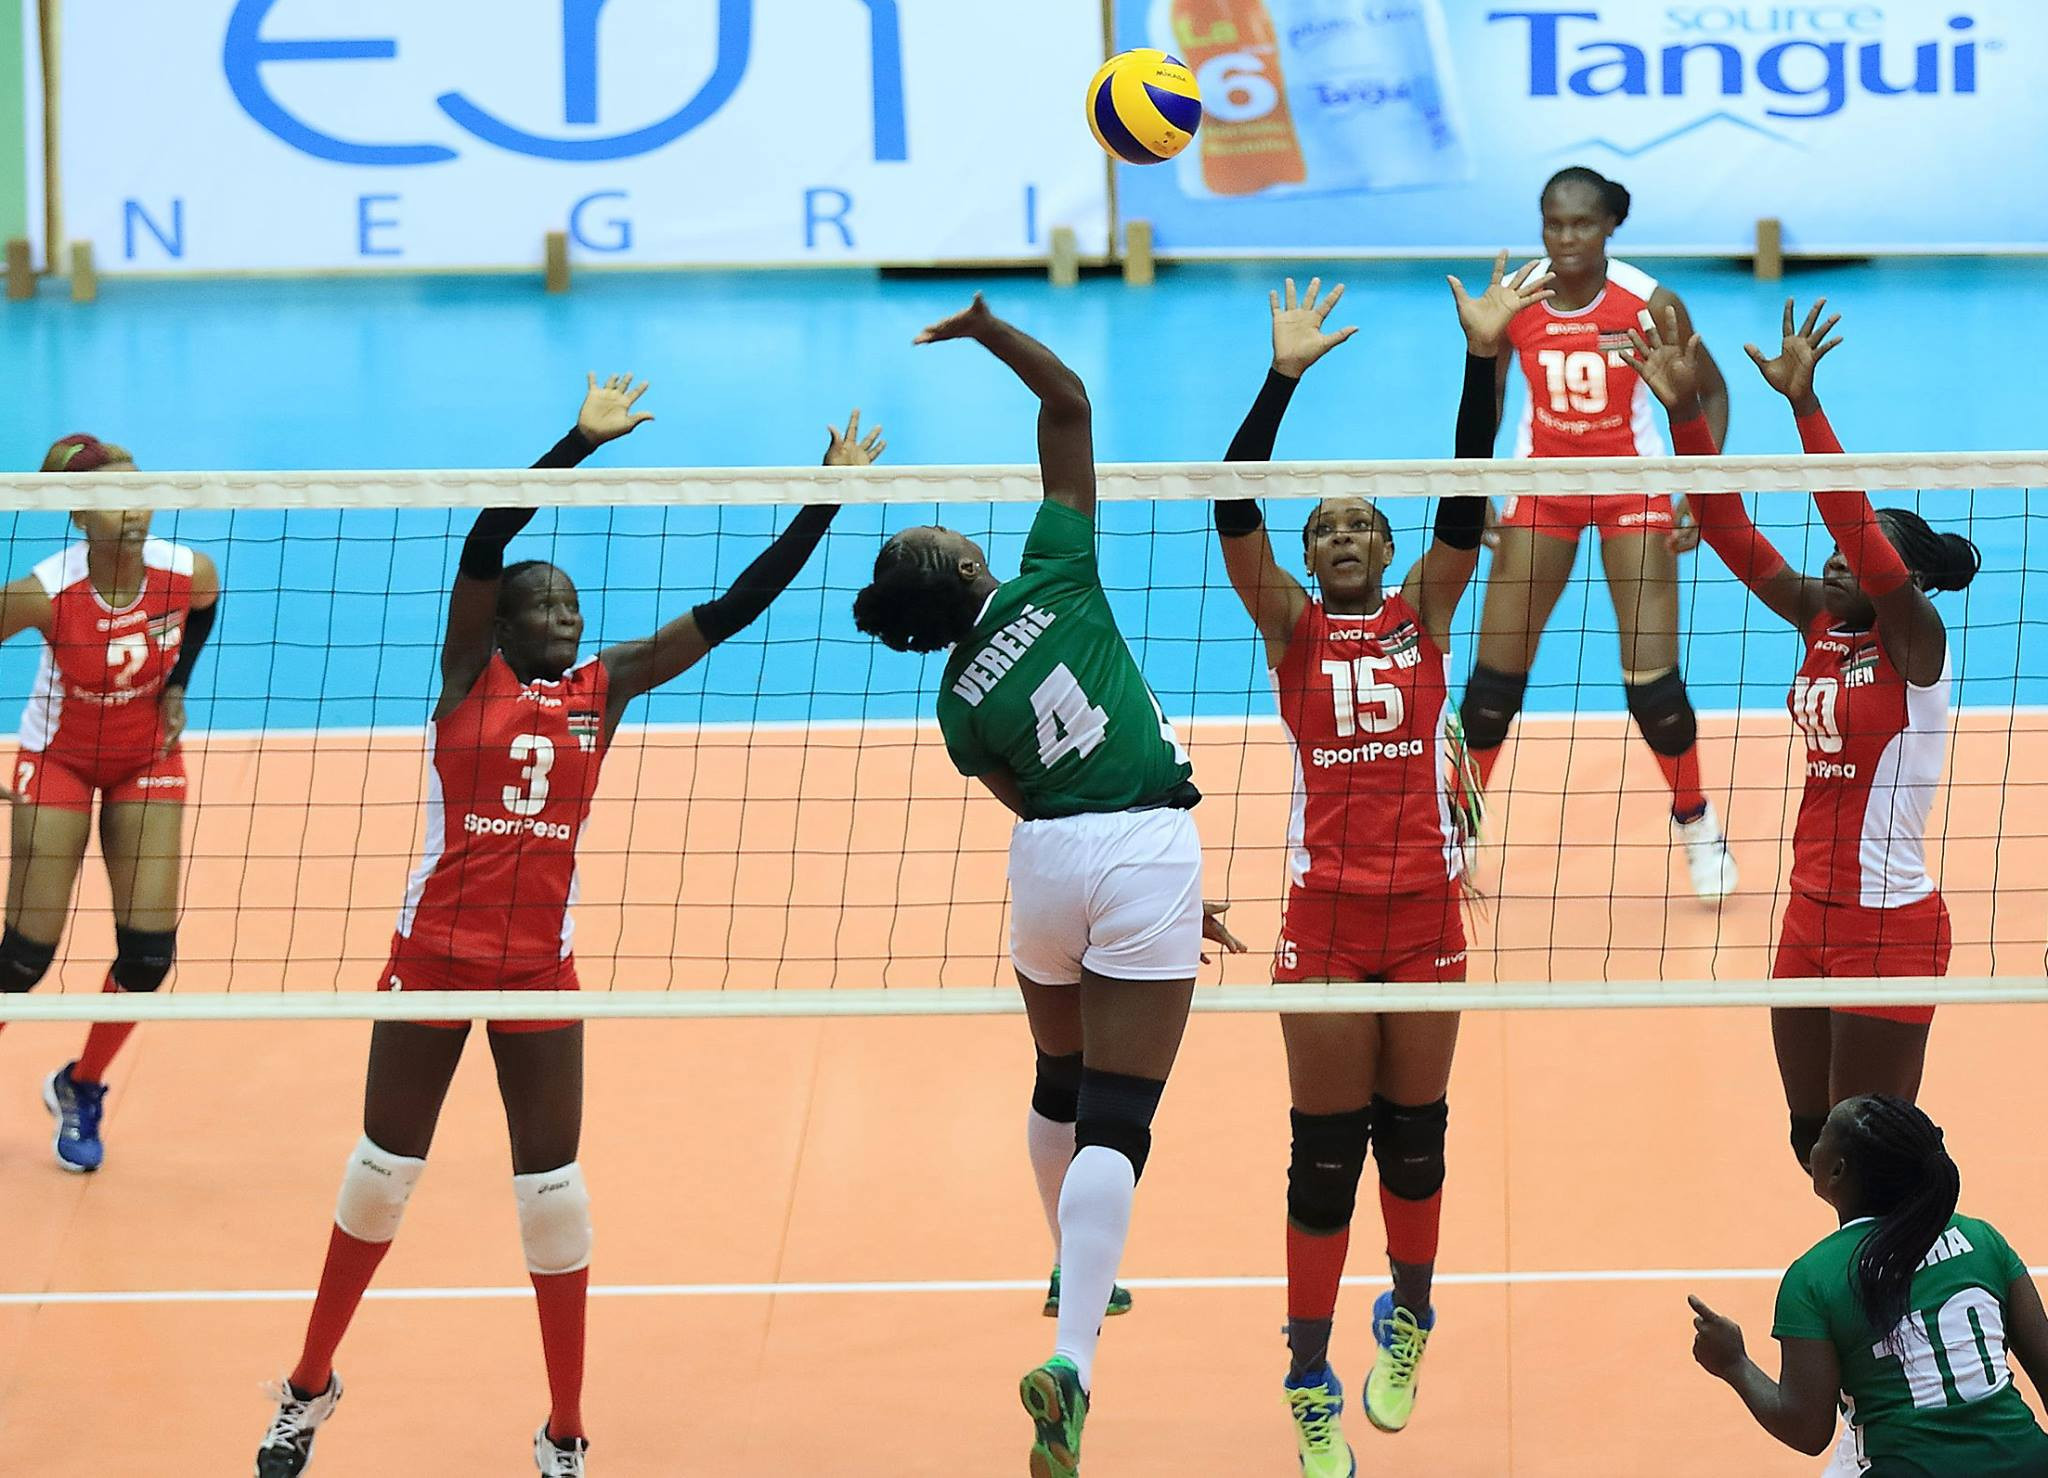 Defending champions Kenya ease to straight sets win as African Women's Volleyball Championship begins